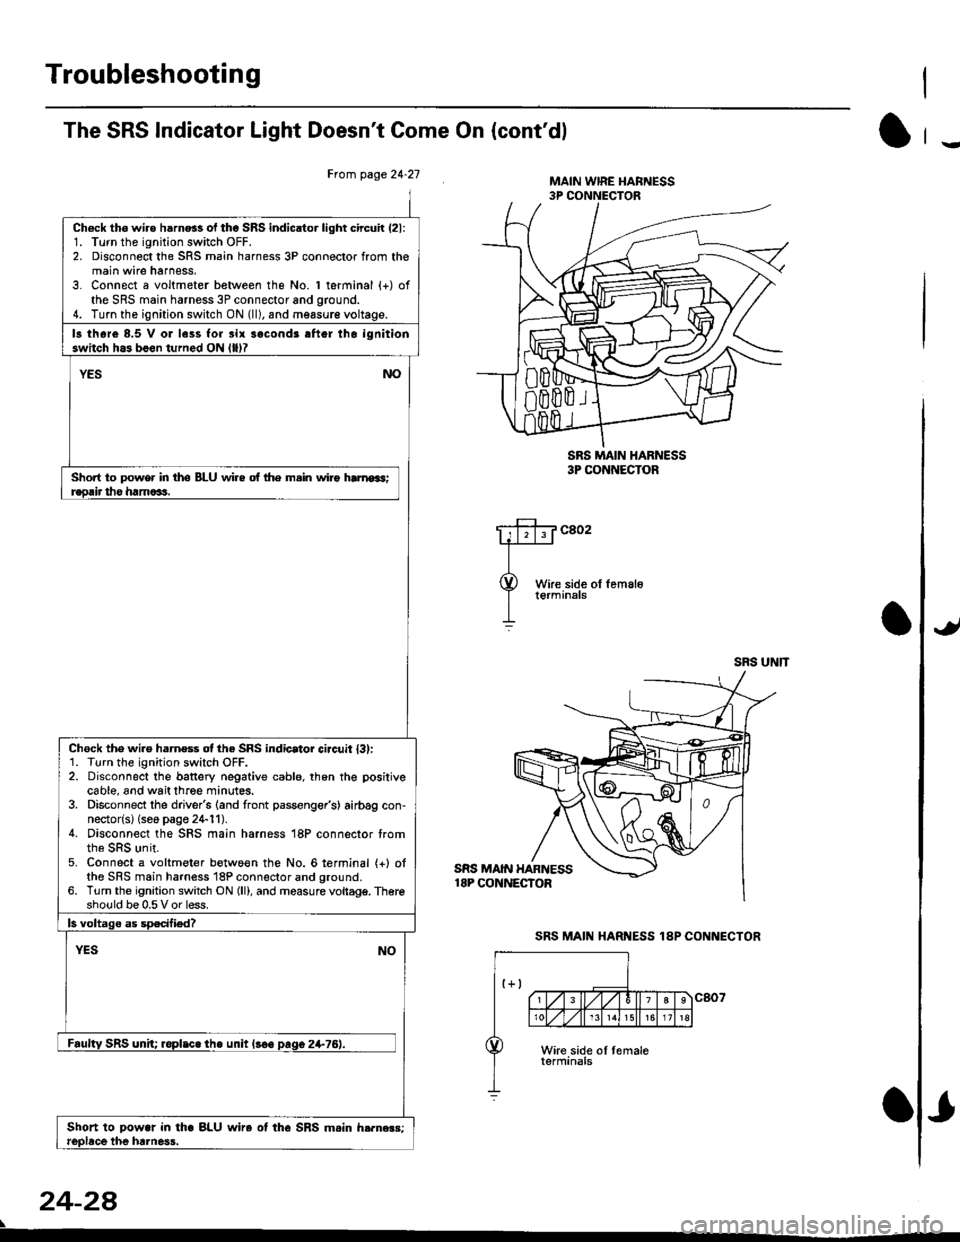 HONDA CIVIC 1996 6.G Owners Guide Troubleshooting
The SRS Indicator Light Doesnt Come On (contdl
Frcm page 24.21
Ch6ck tho wire h6rn6s of tho SRS indicator light circuir (21:
1. Turn the ignition switch OFF.2. Disconnect the SRS mai